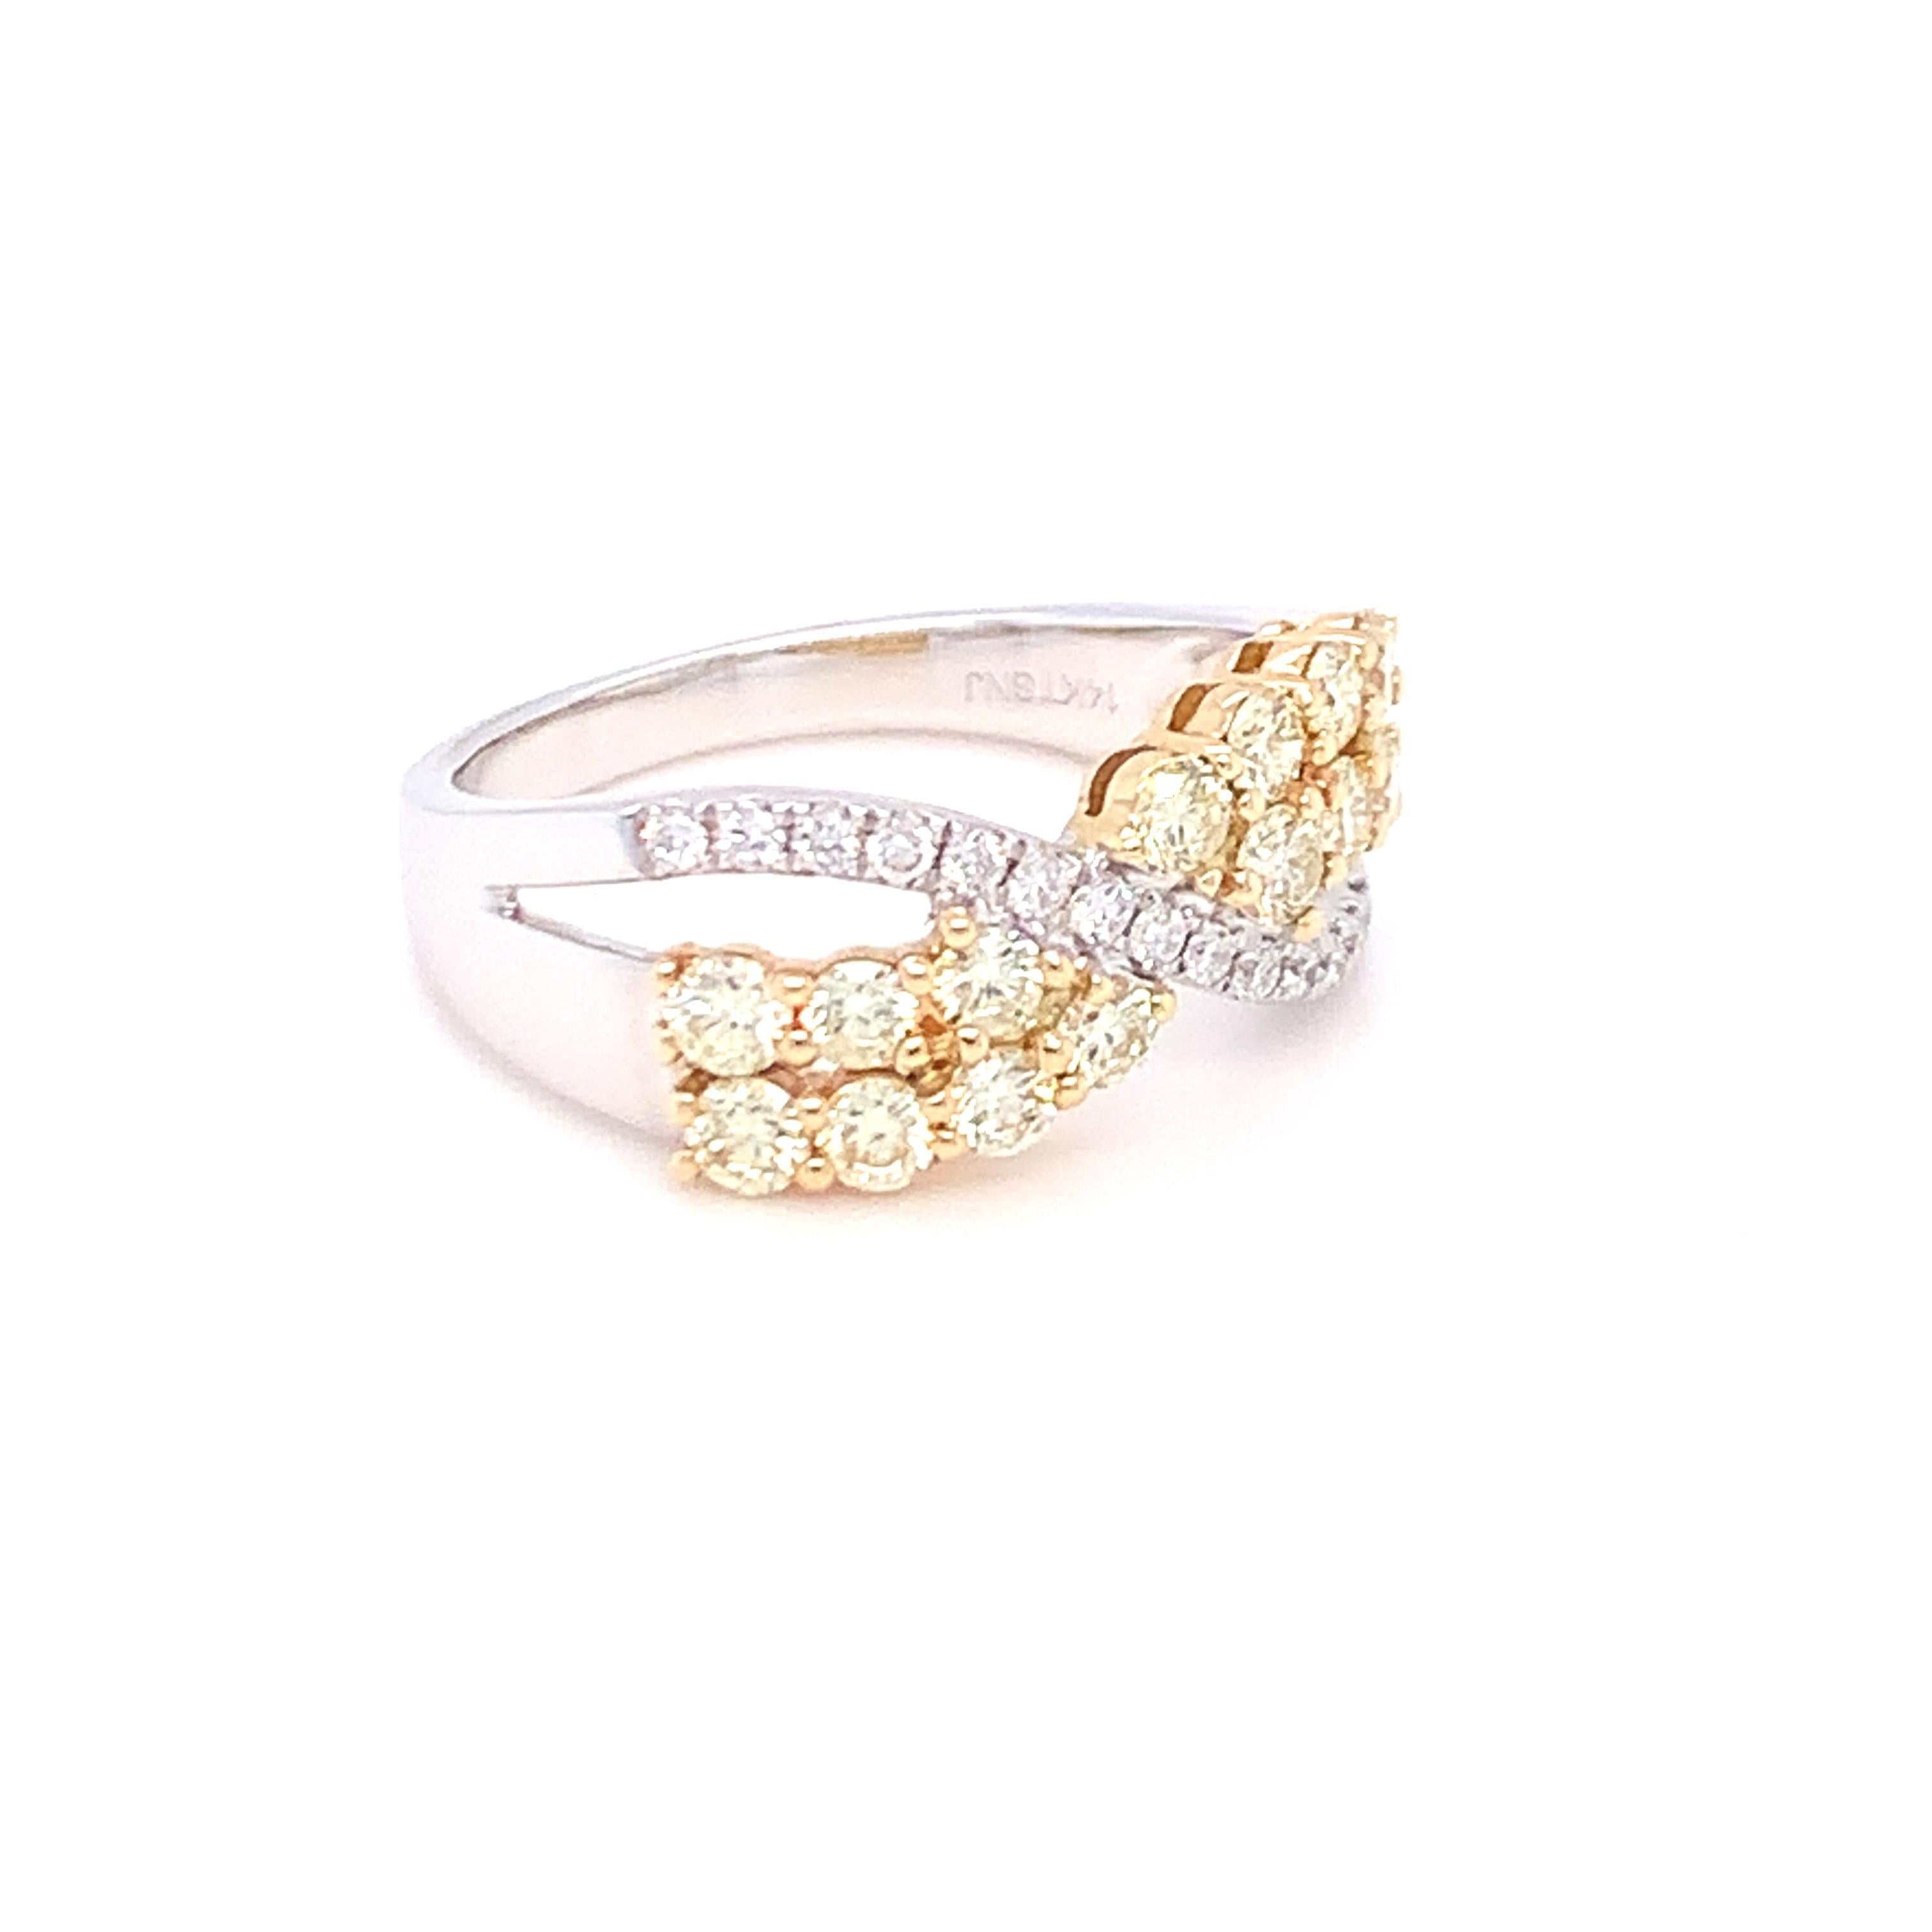 A combination of yellow and white diamond in style of a bow makes this band a beautiful piece of jewelry. Set in two tone gold and finished with skilled hands.
Yellow Diamond: 0.87ct
White Diamond: 0.13ct
Gold: 14K Two Tone
Ring Size:7